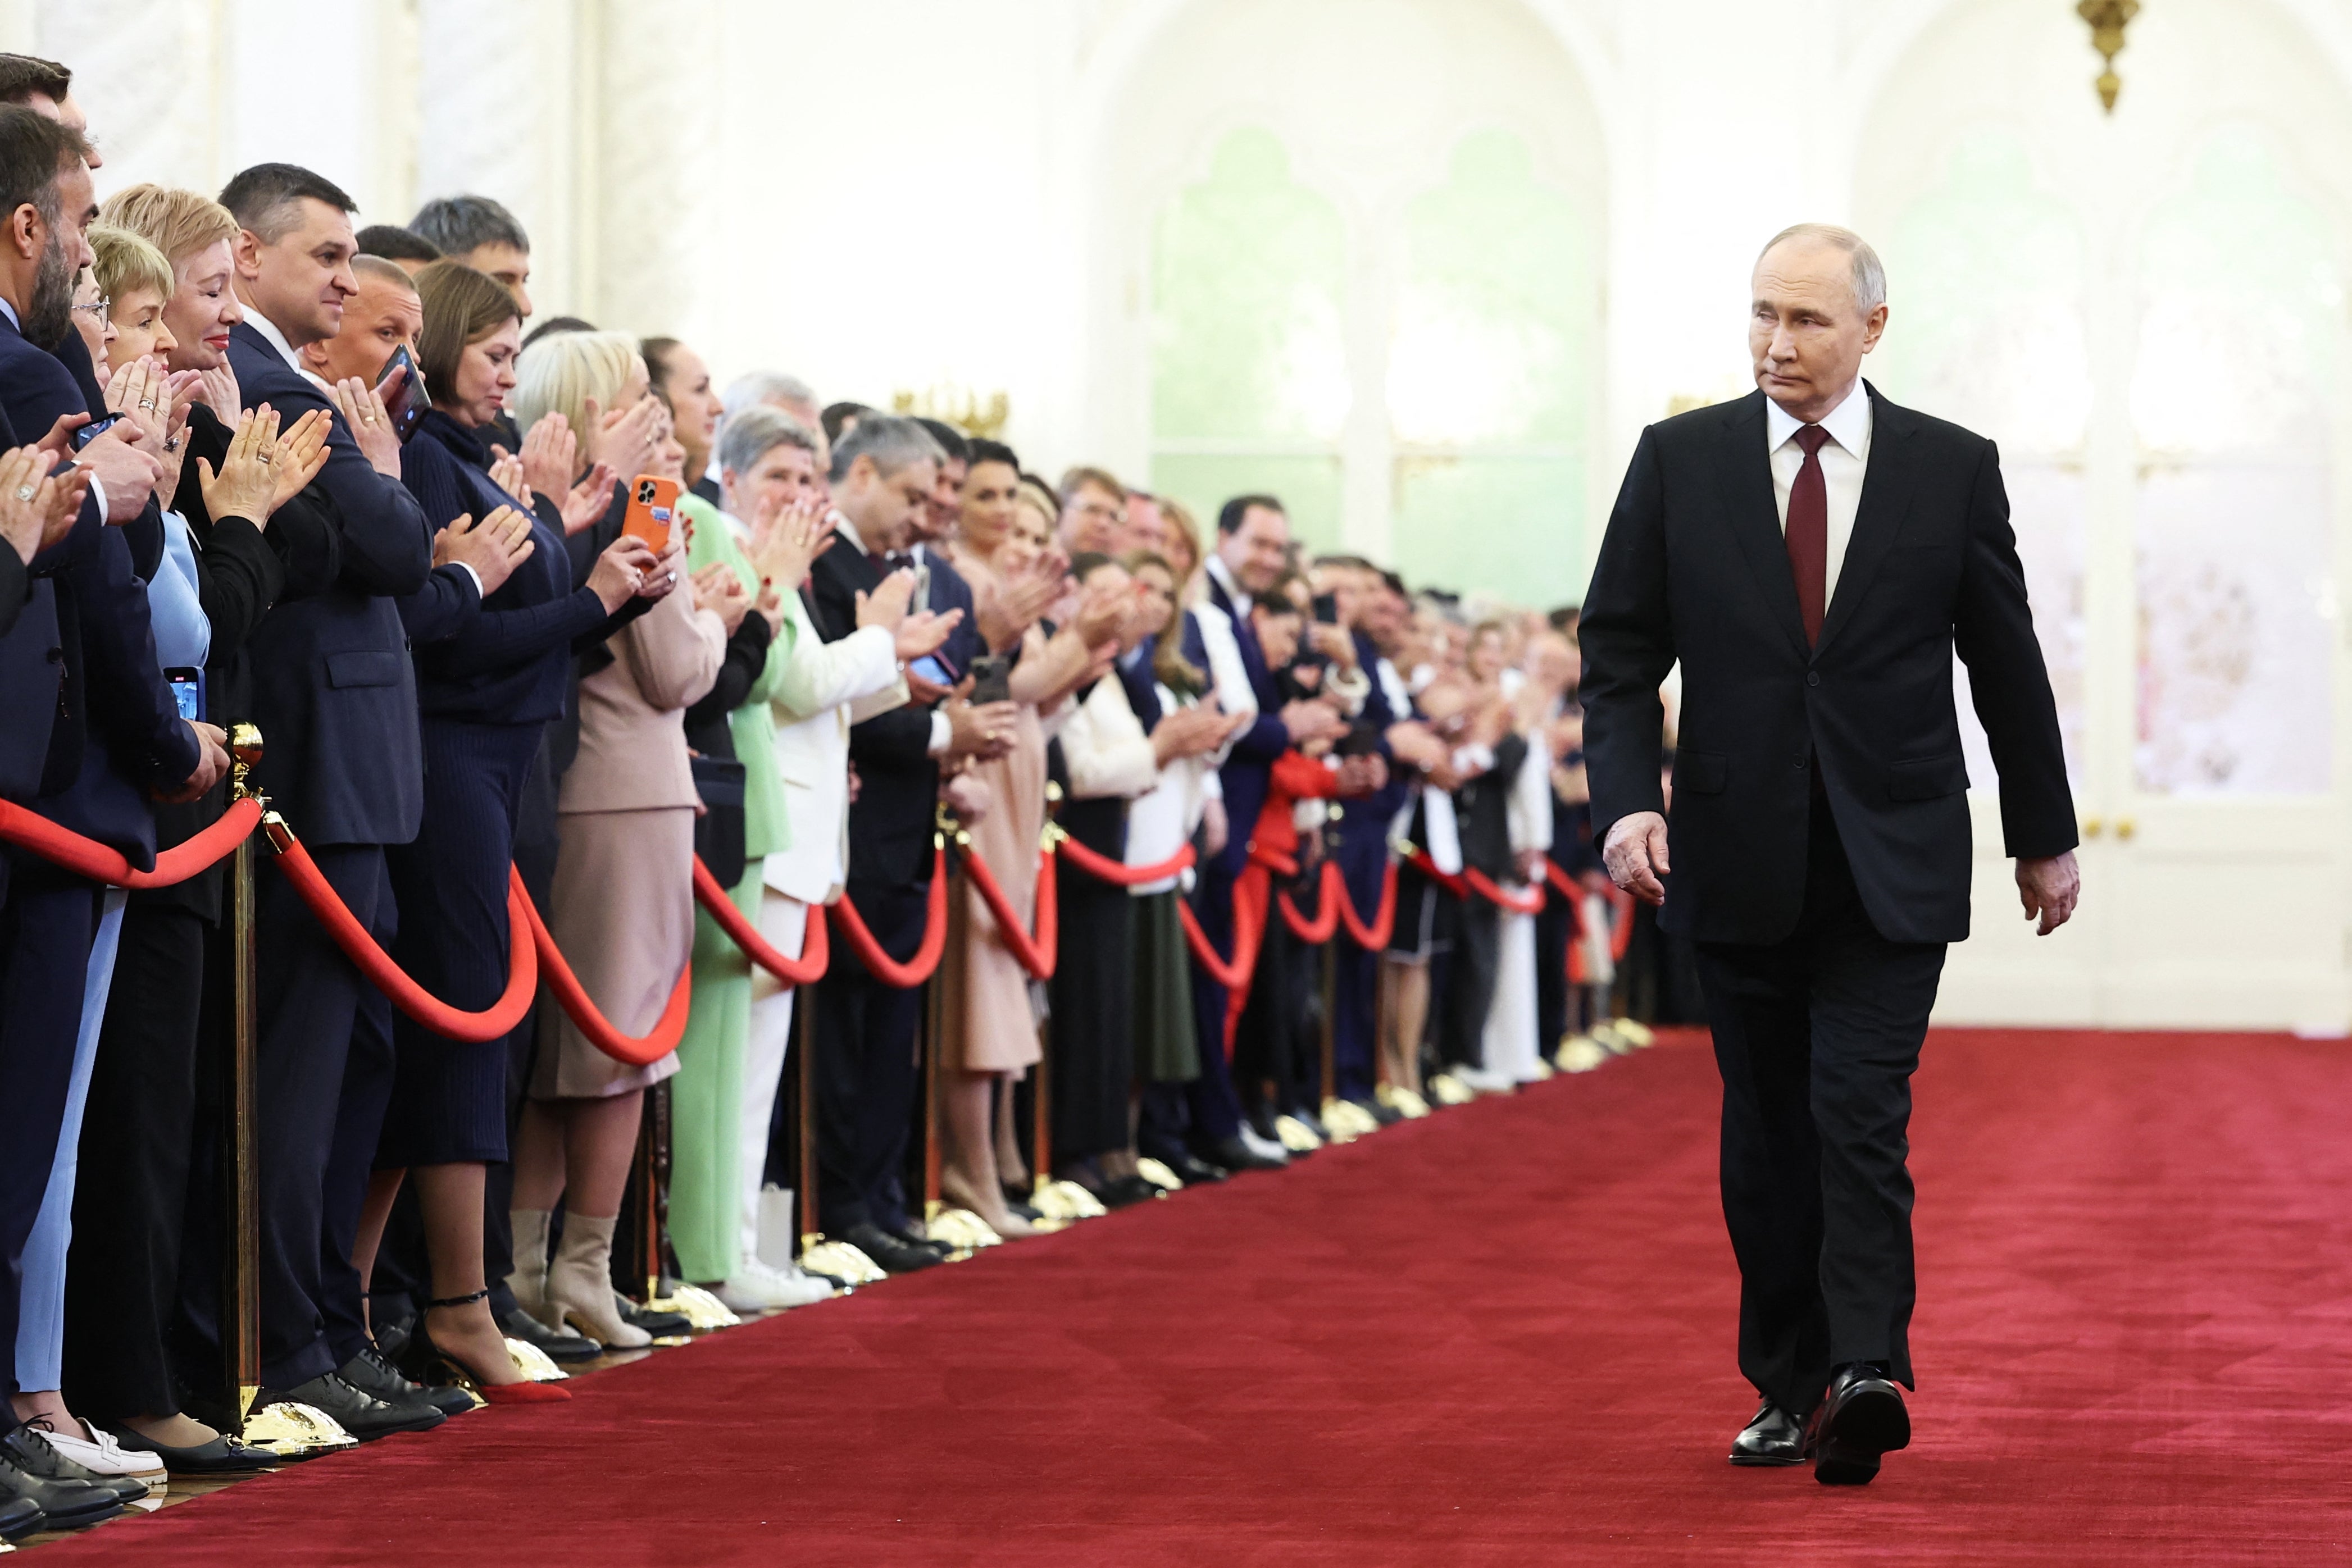 Vladimir Putin being inaugurated for a fifth term as Russian President